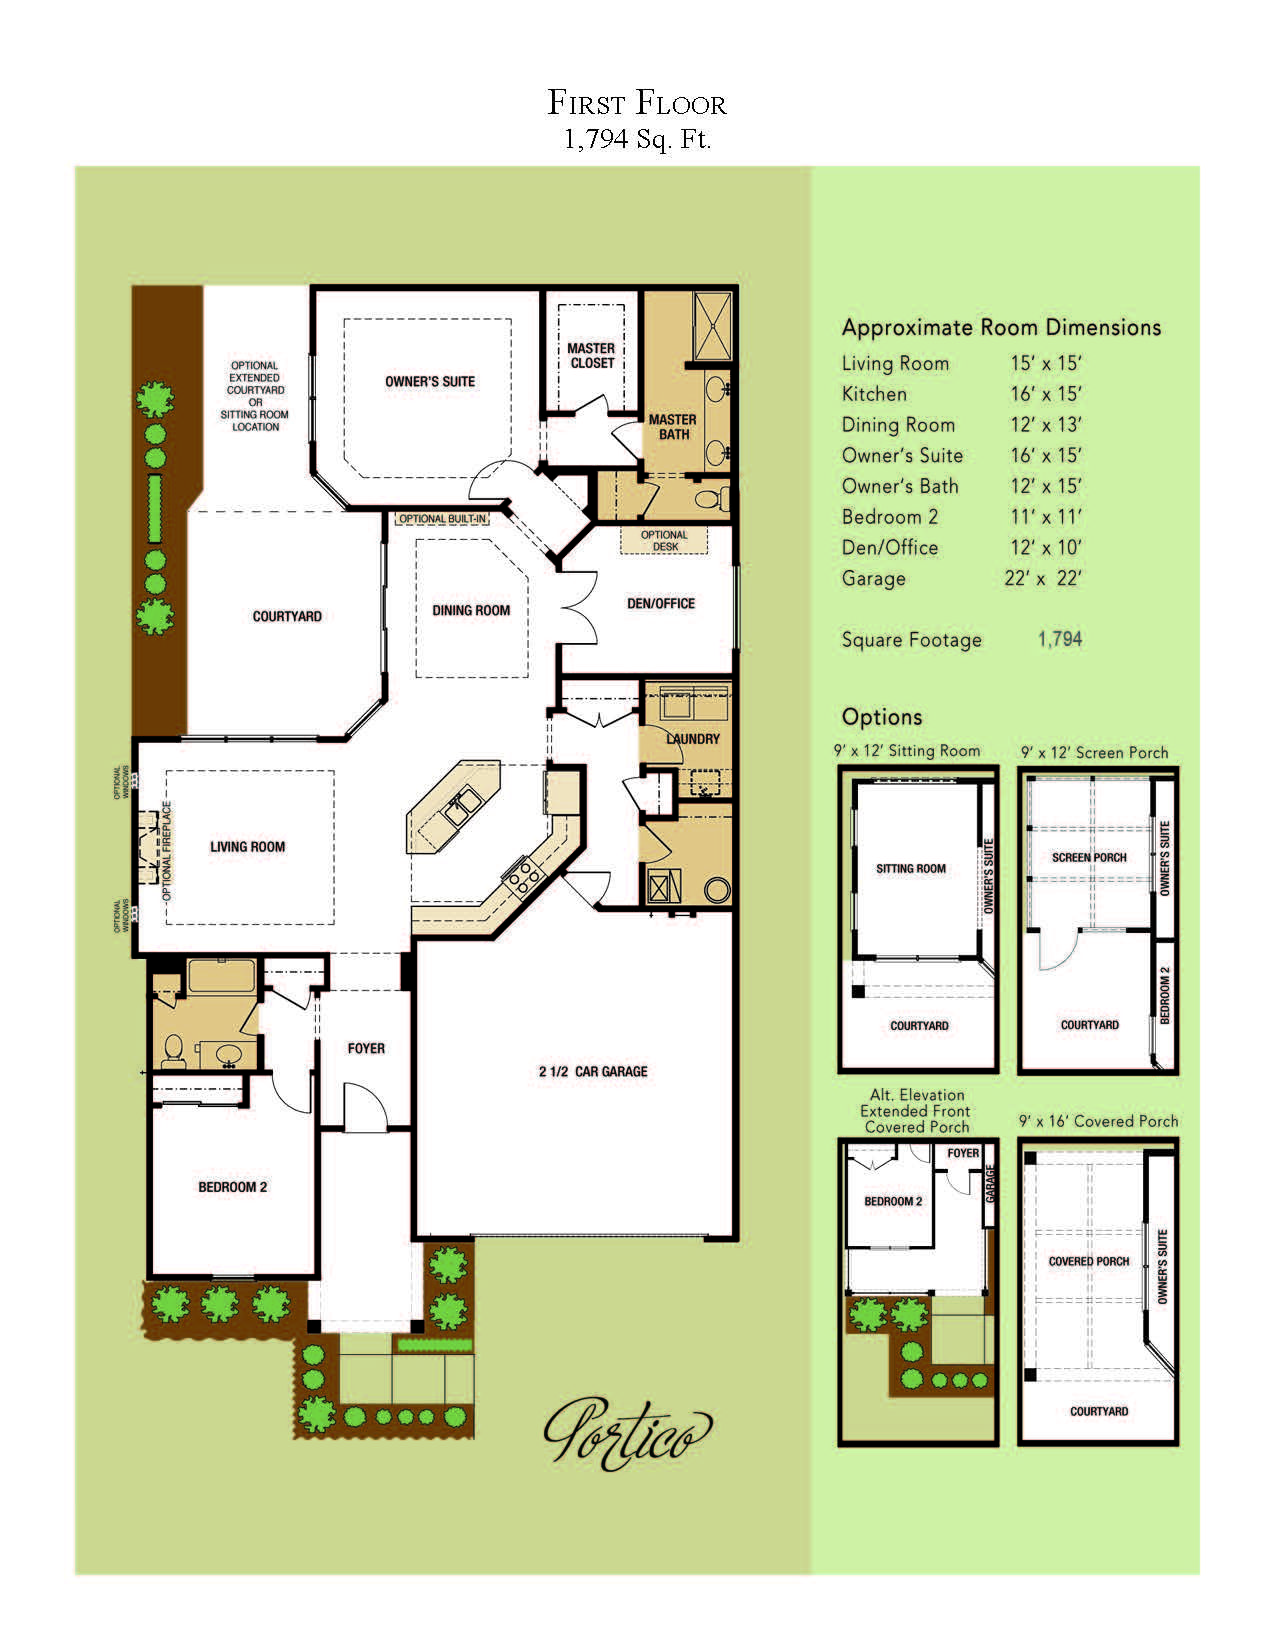 Fireplace Dimensions Plan Beautiful the Portico First Floor Plan View